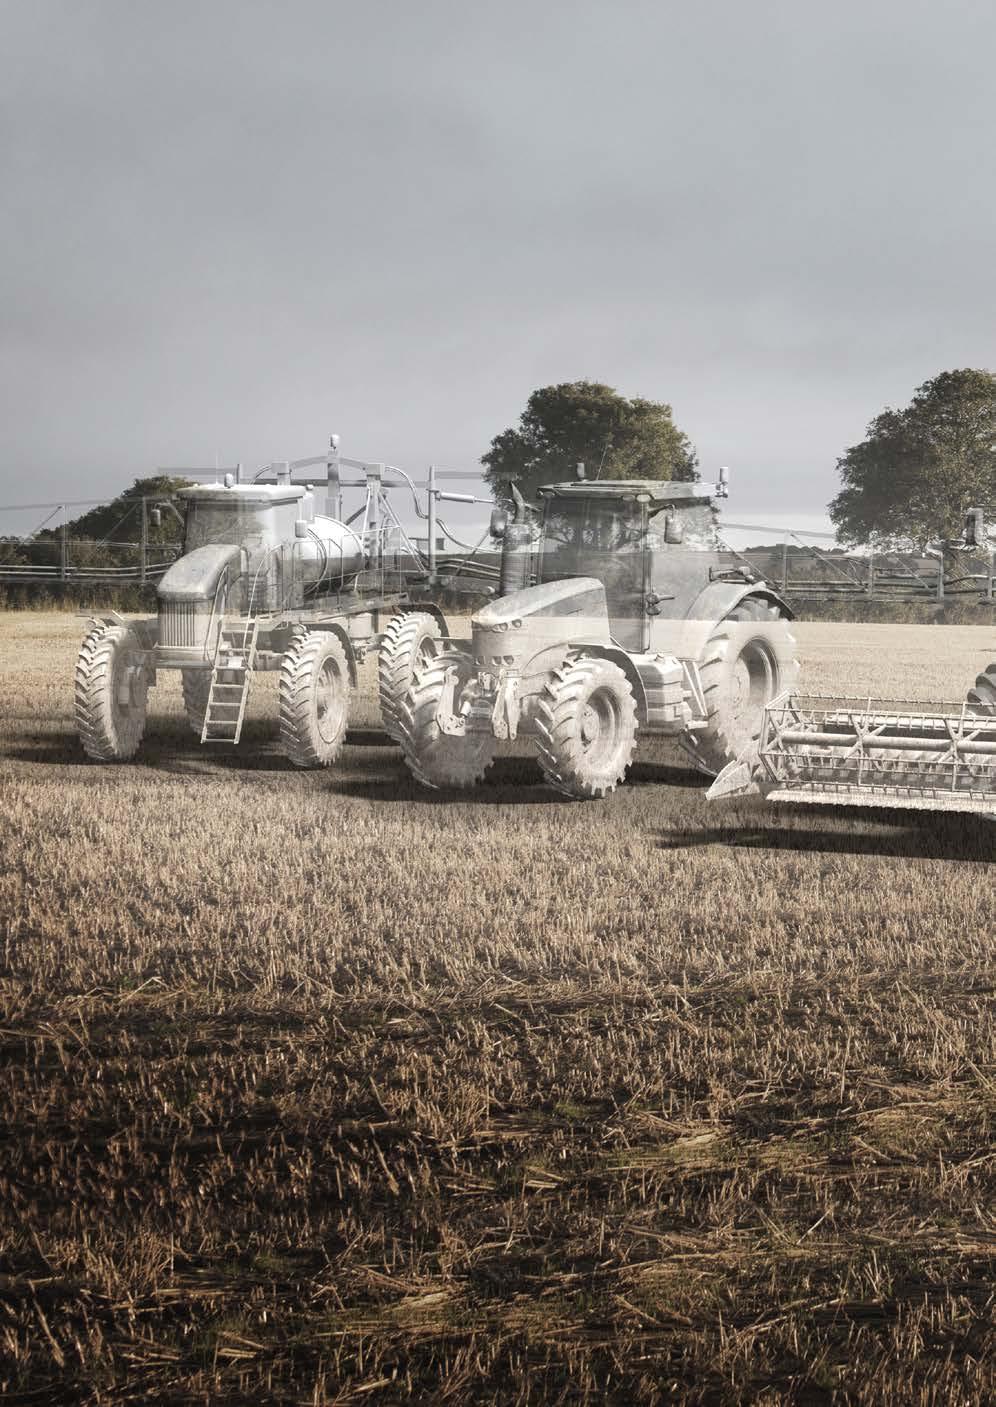 Drive and motion systems to meet your agricultural needs Dana innovations are engineered to support increased crop yields, optimized harvesting operations, lower emissions, improved operator safety